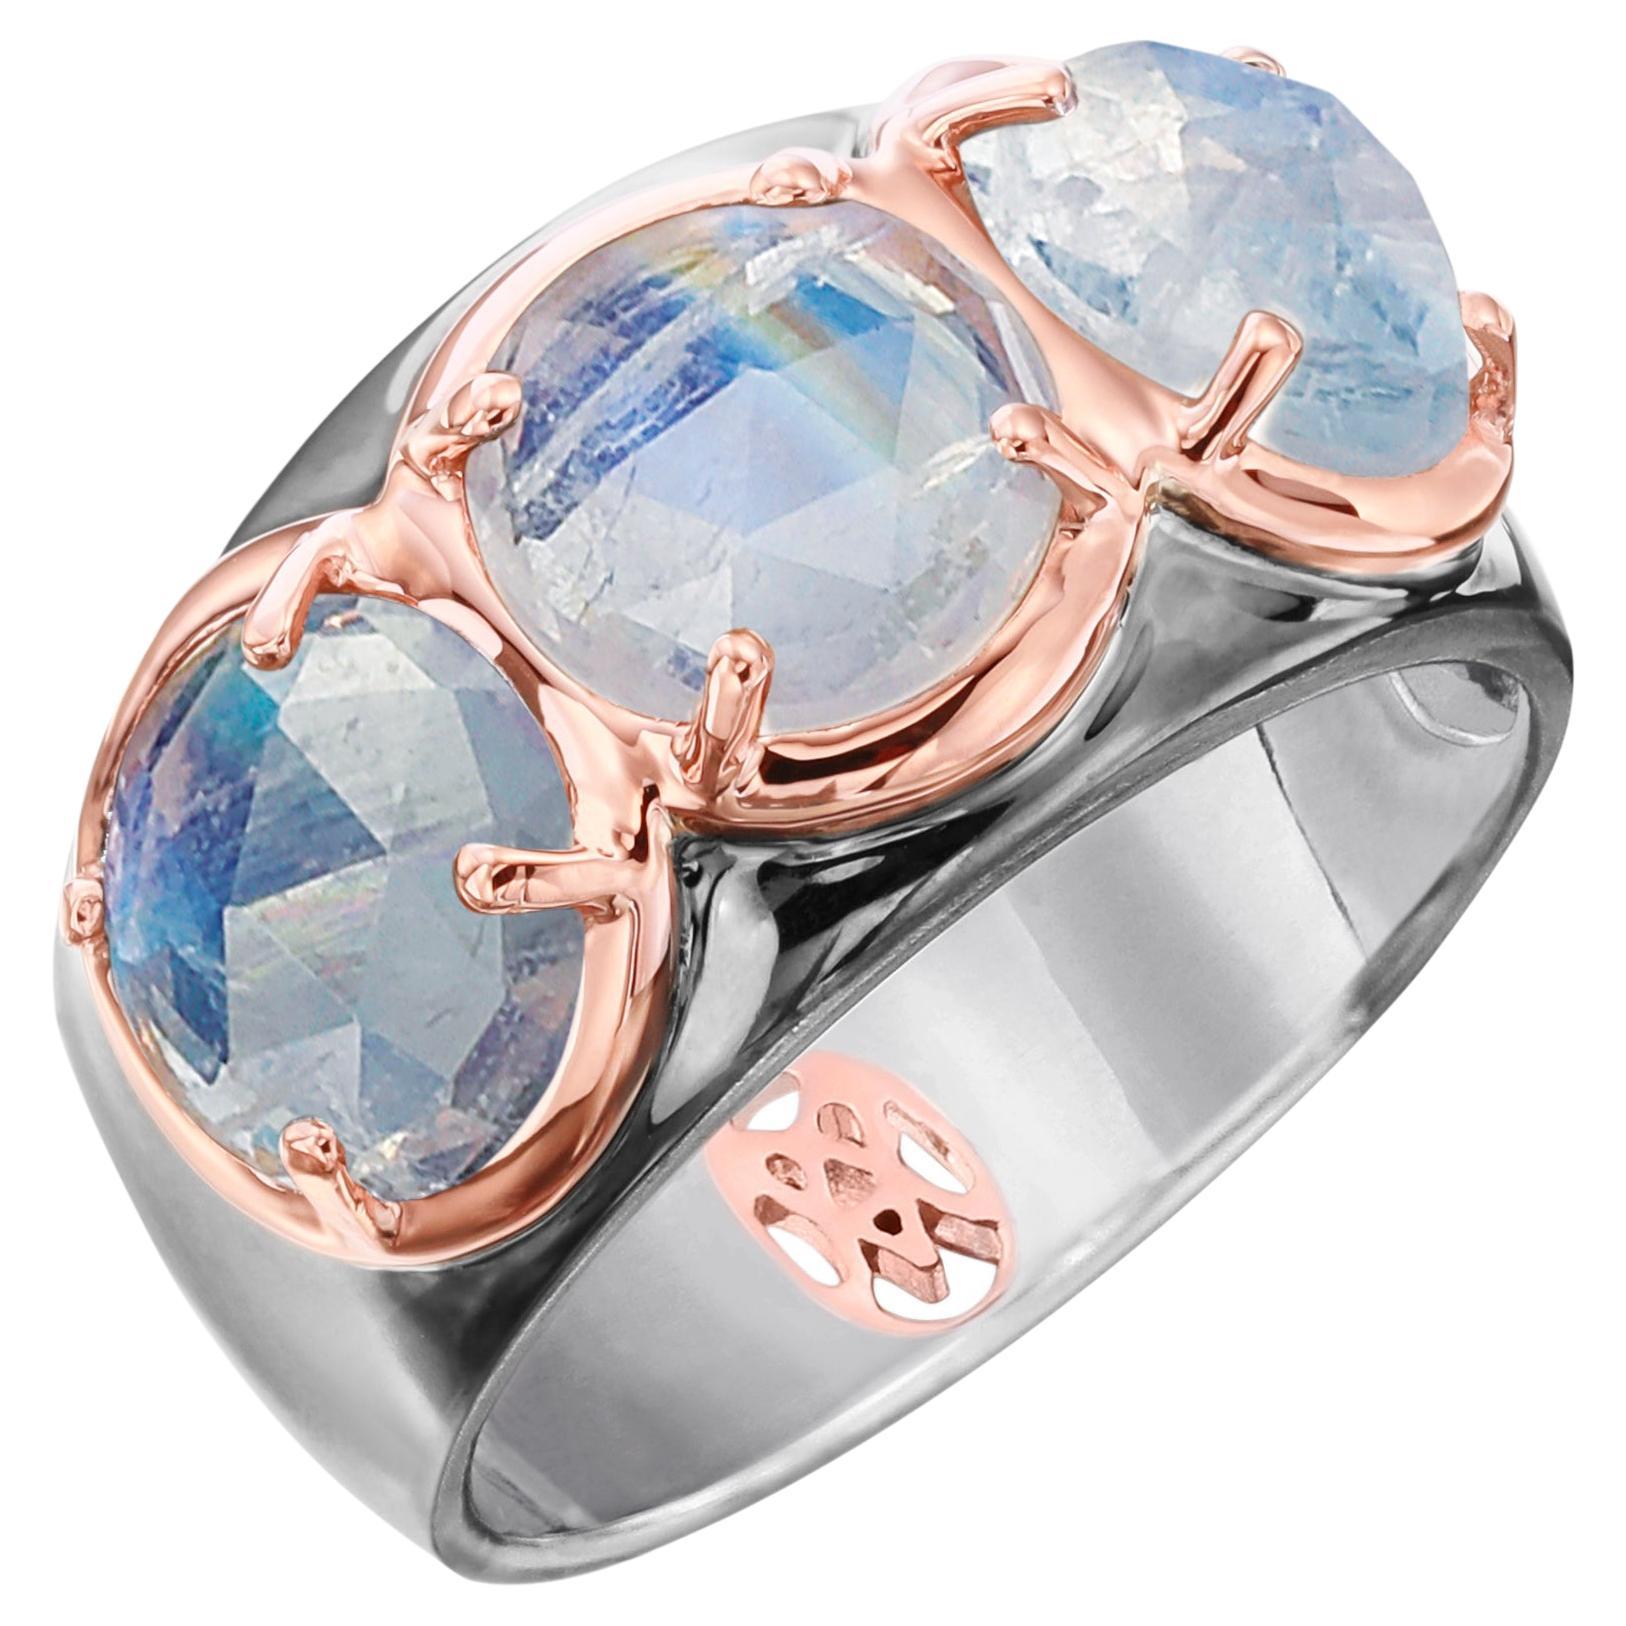 Rose Gold & Sterling Silver Wide Band Ring with Rose Cut Moonstones